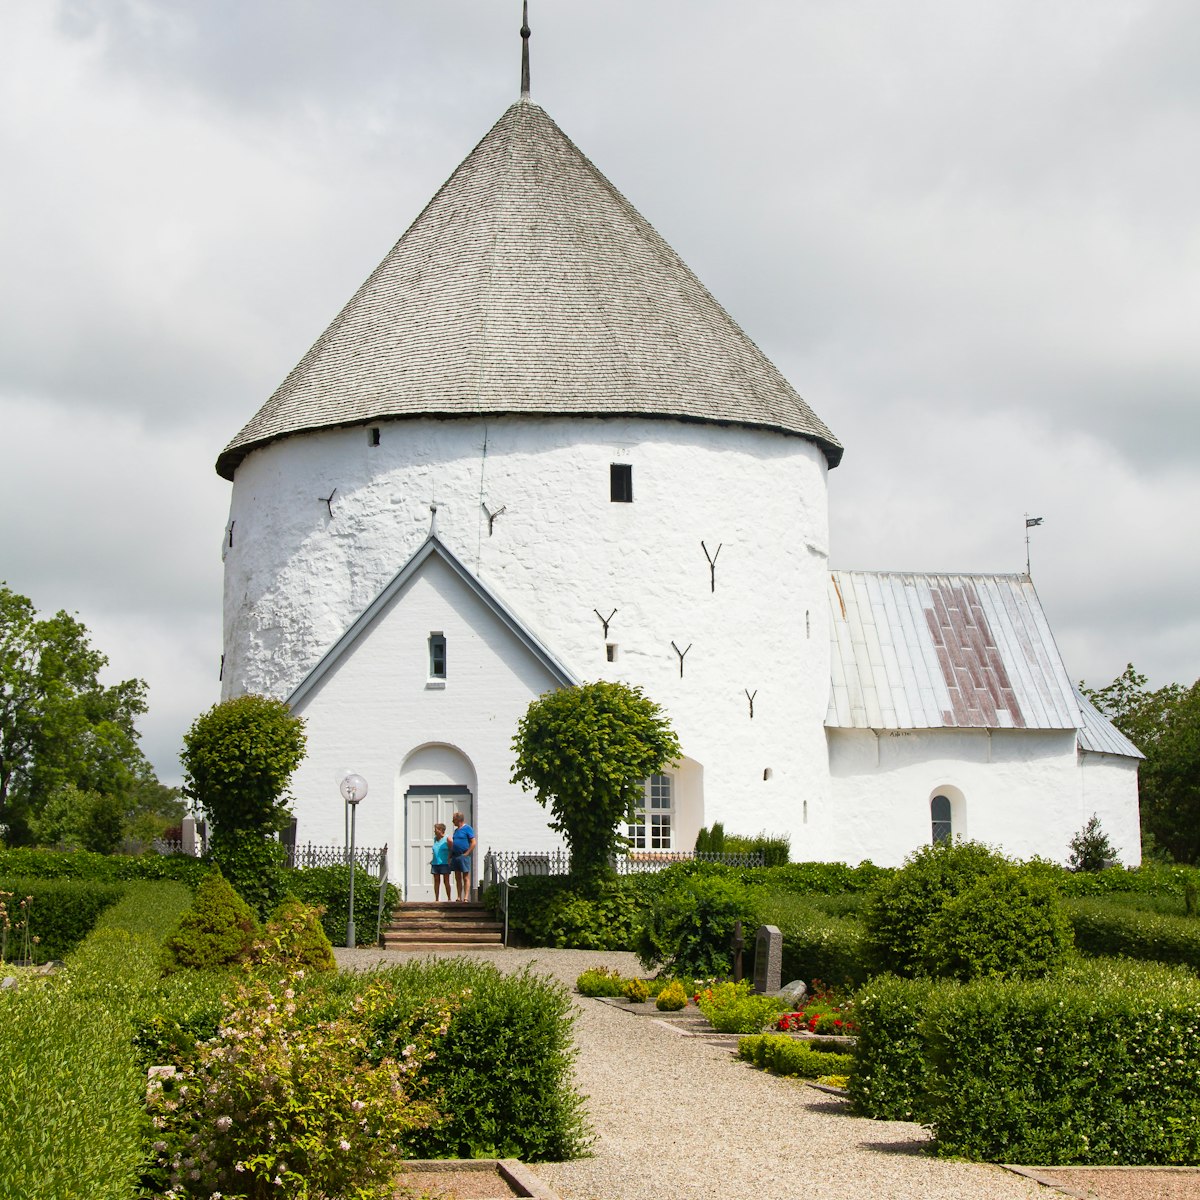 The church in Nylars, Bornholm island, Denmark, is the oldest "round church" on the island.